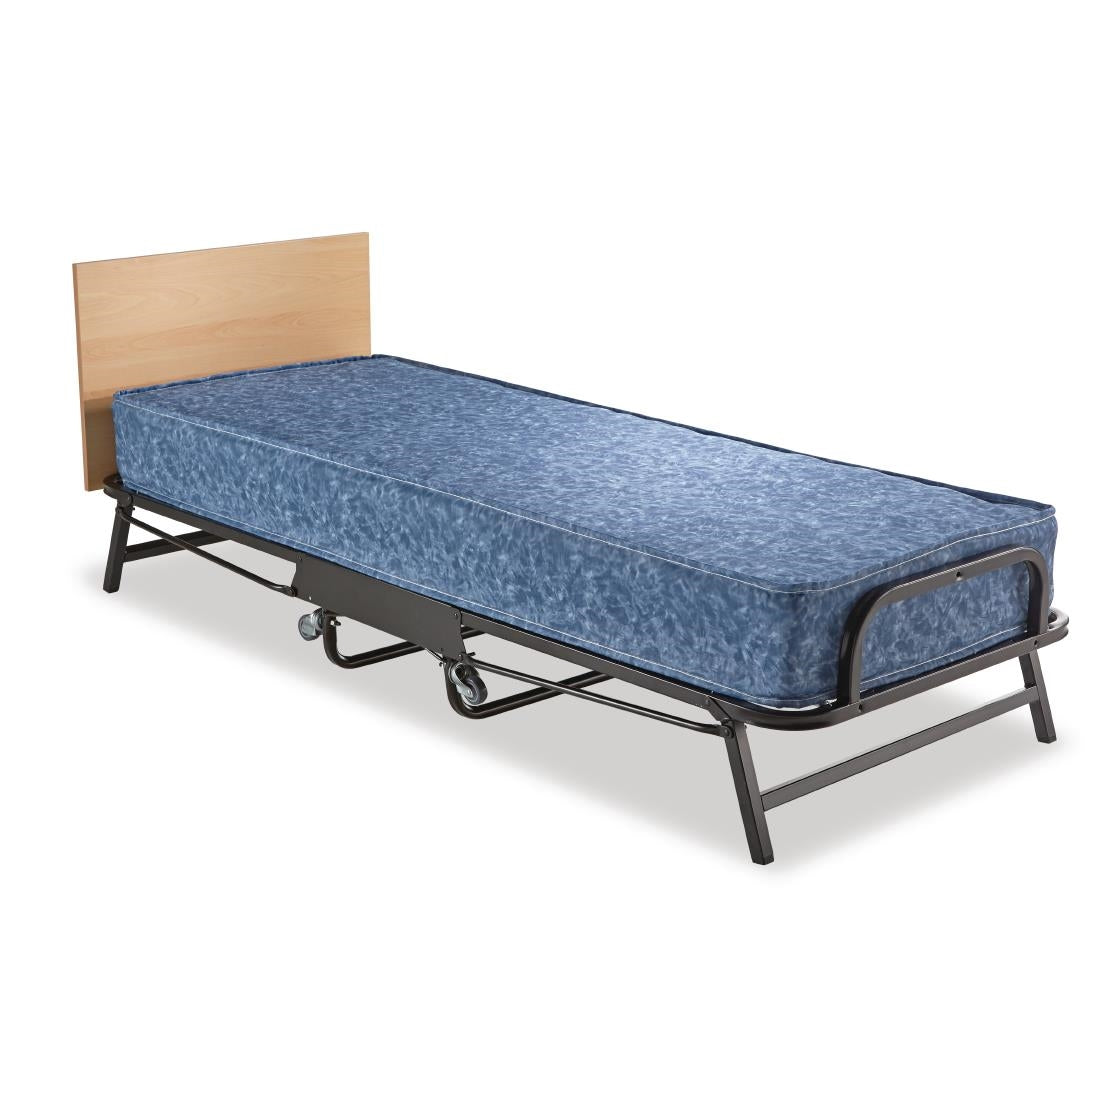 Jay-Be Contract Folding Bed with Water Resistant Mattress Single in Black Colour JD Catering Equipment Solutions Ltd